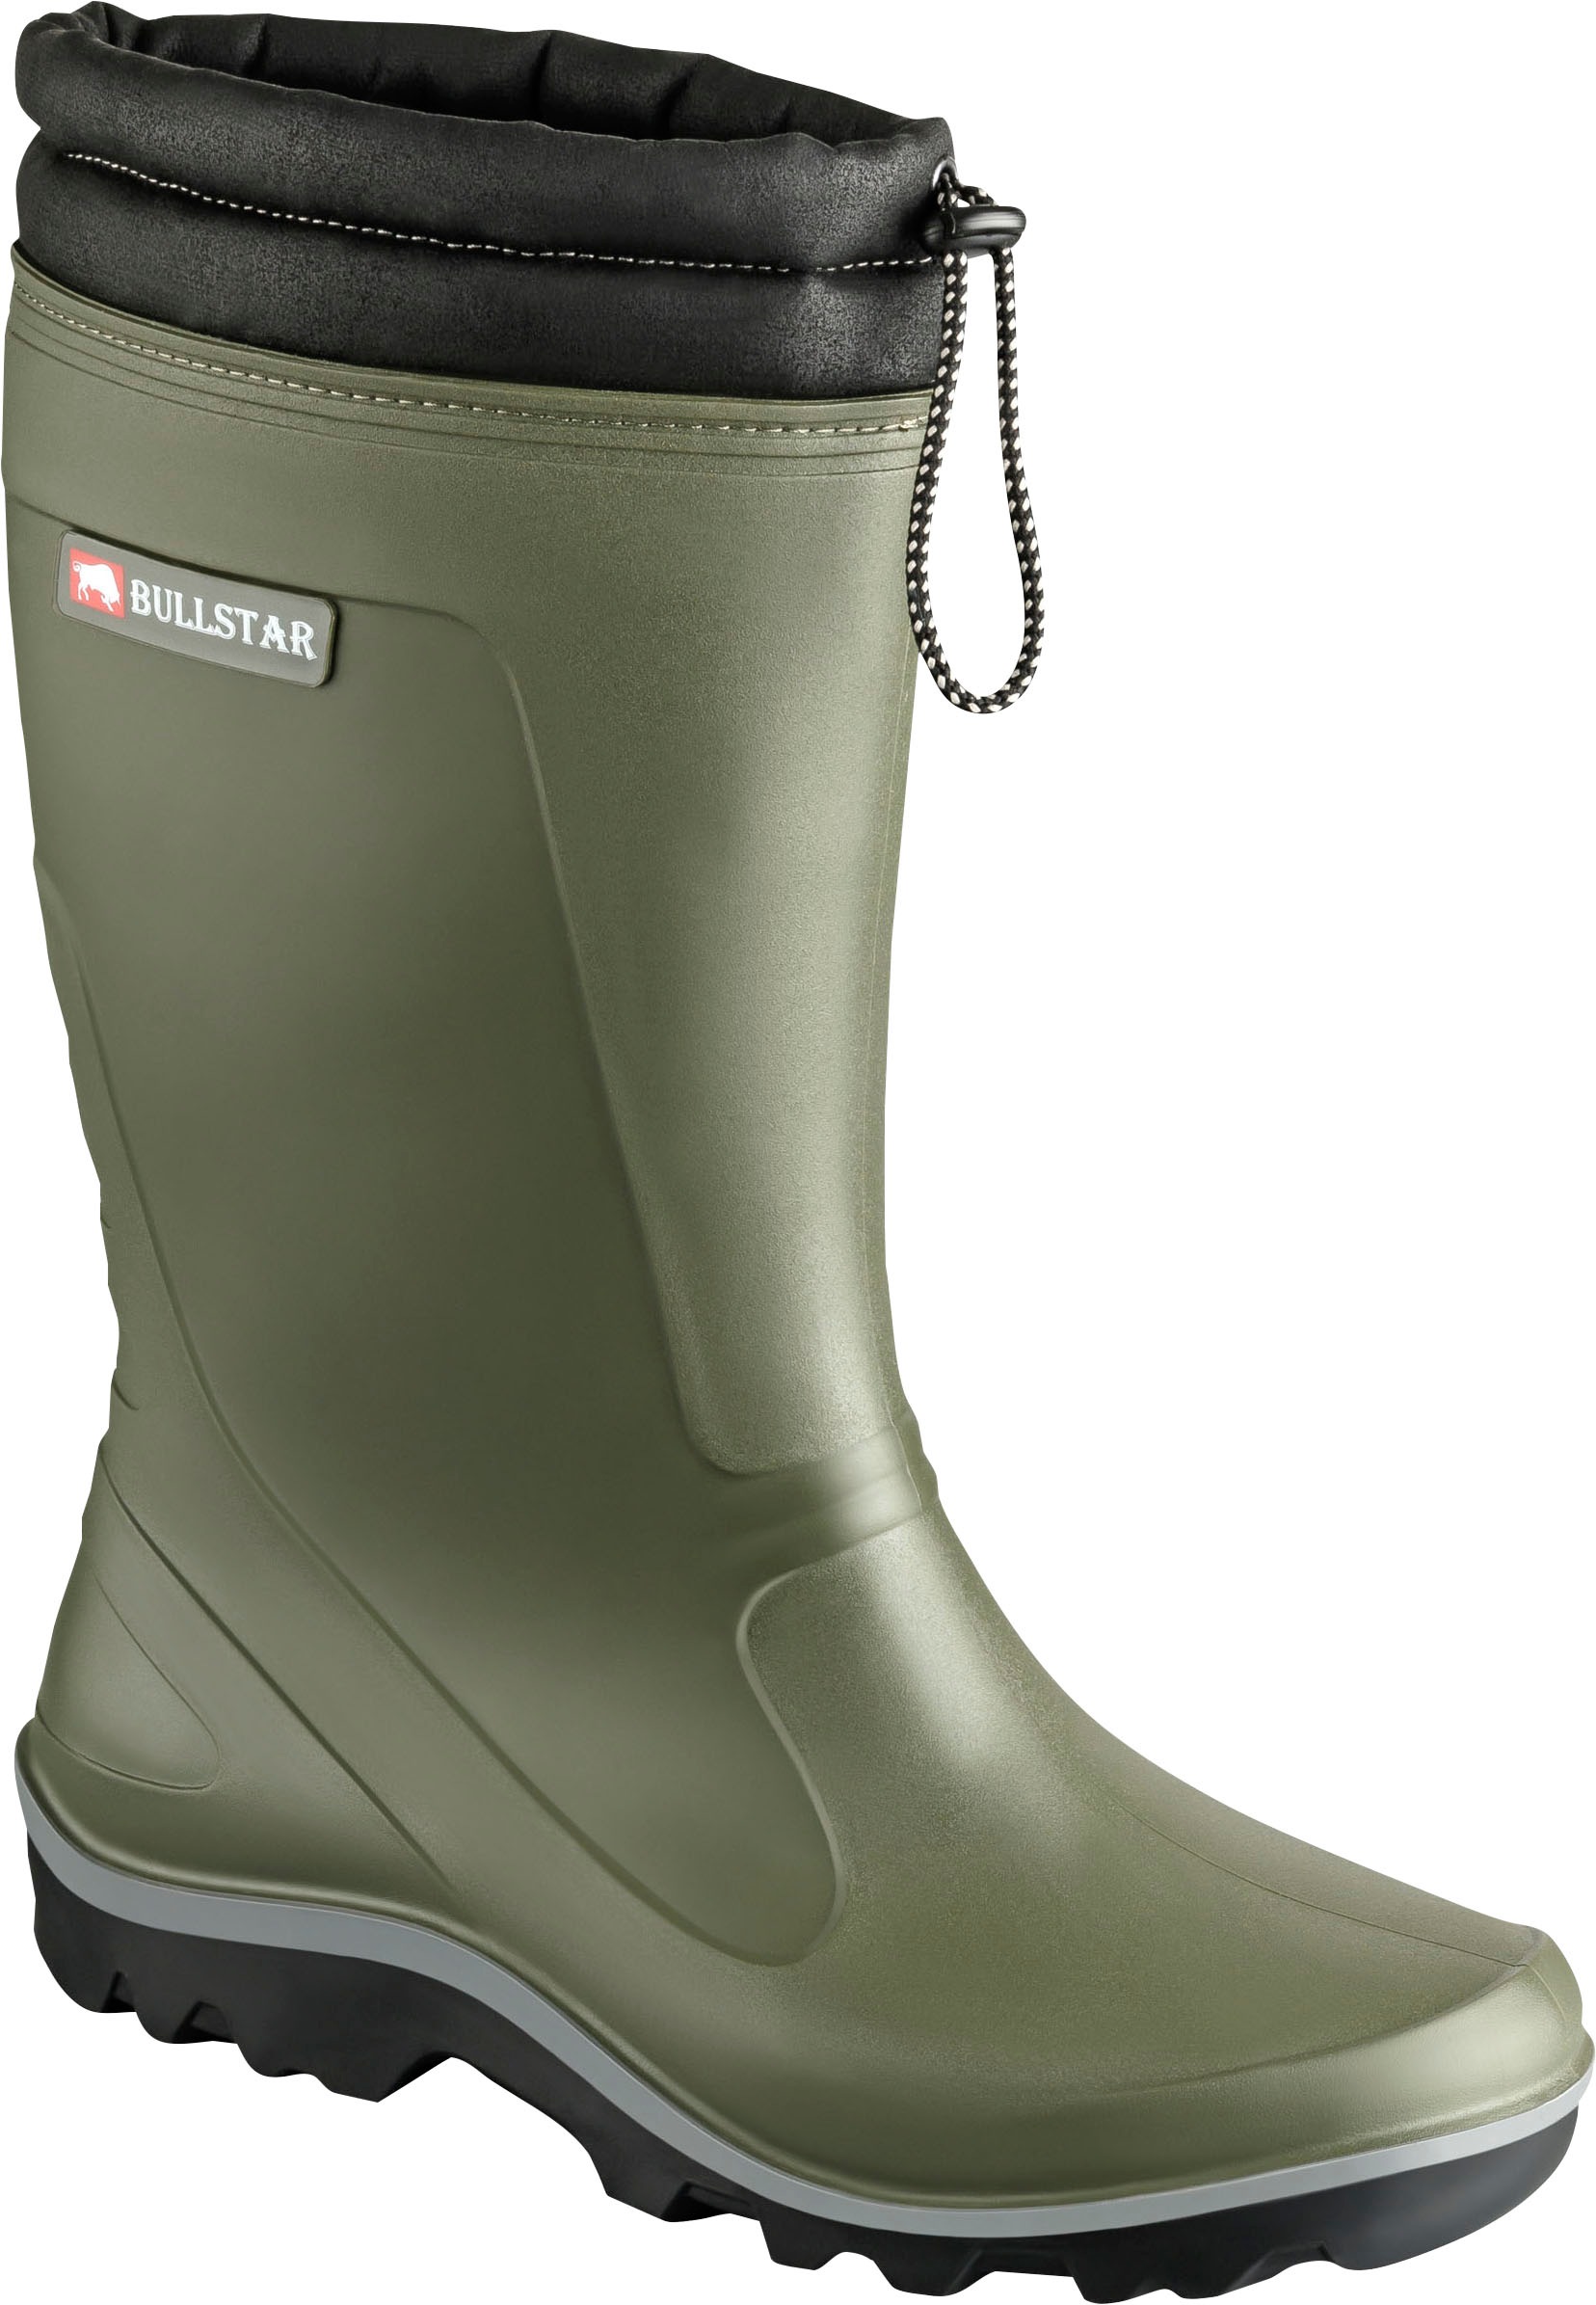 safety& more Safety& more Winterstiefel »Thermo-Win...